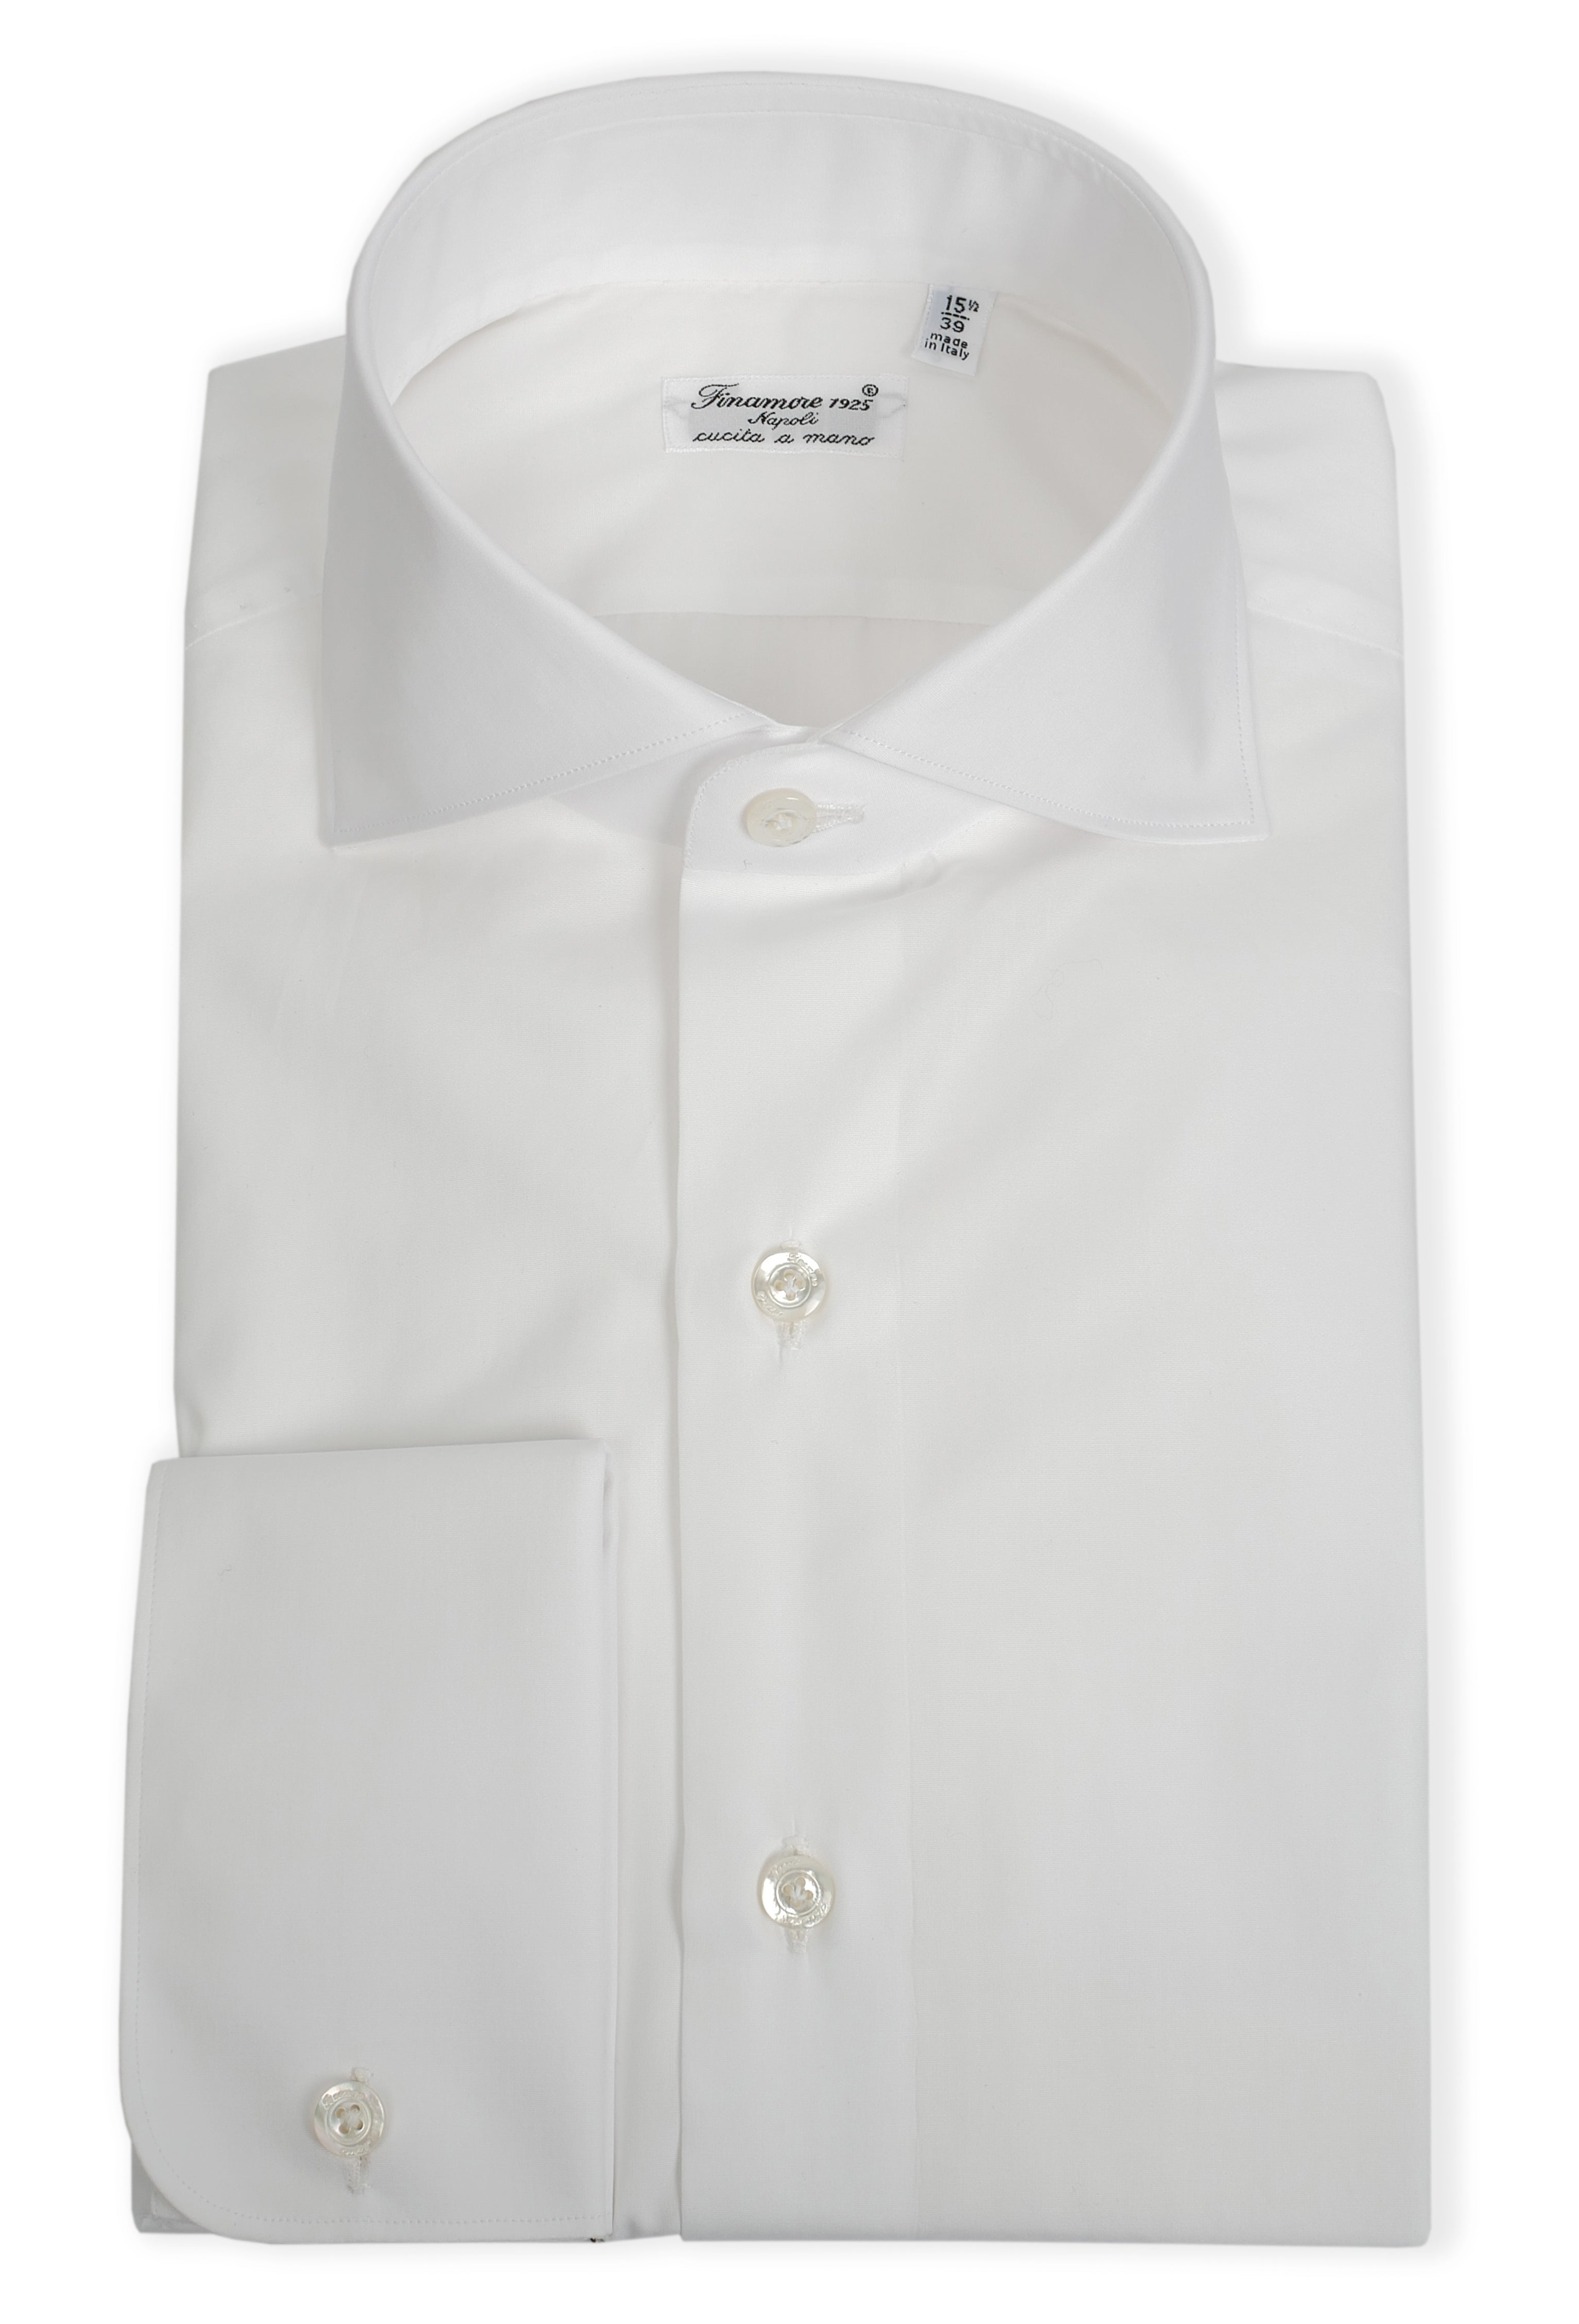 Tailored shirt in double twisted poplin cotton with twin cuffs, Milan line